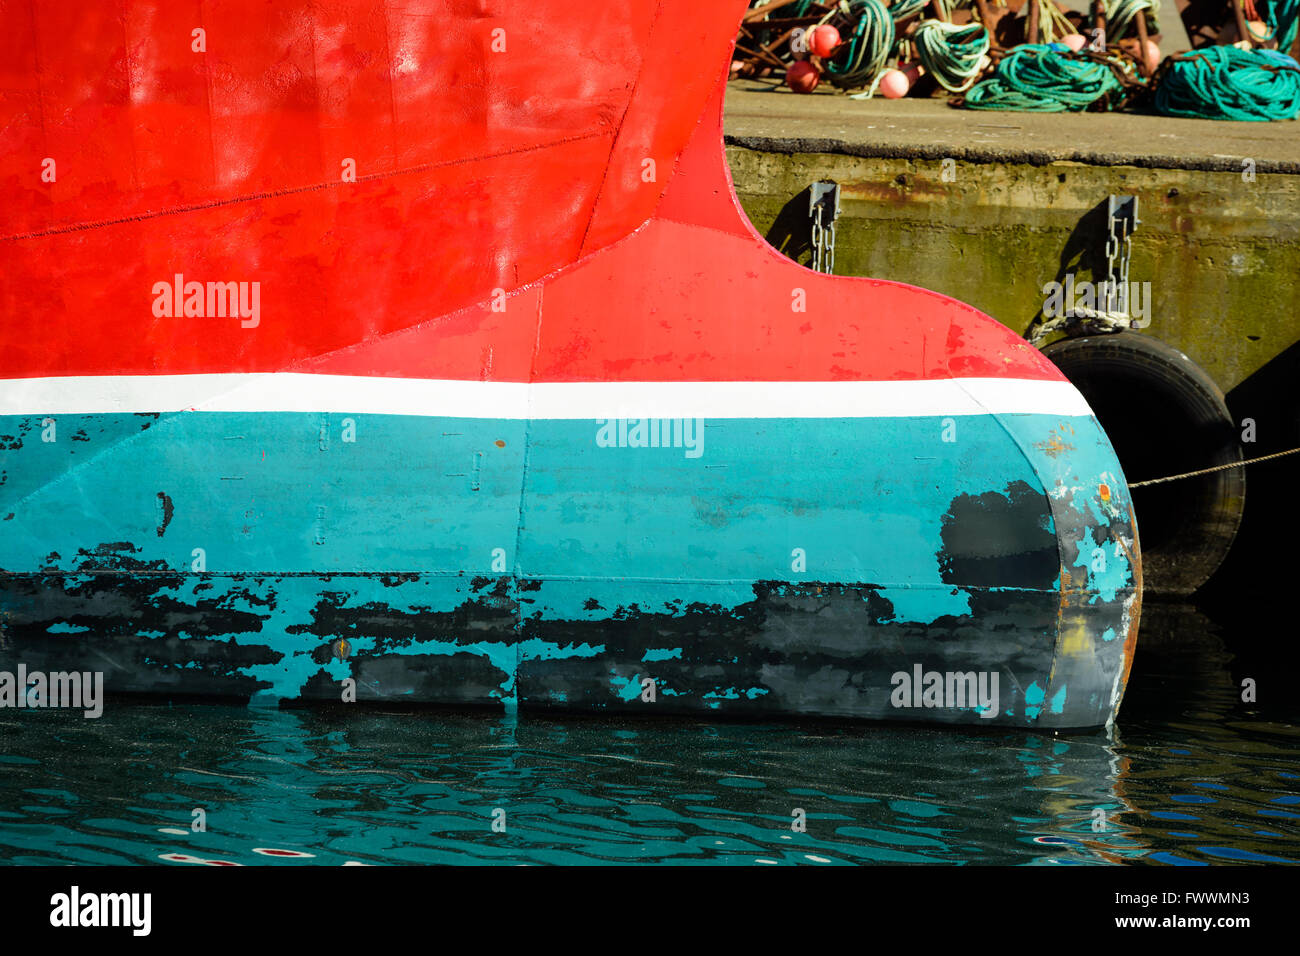 Bulbous bow on the fore of a trawler fishing boat moored at the docks. Red, white and green  are dominating colors. Stock Photo